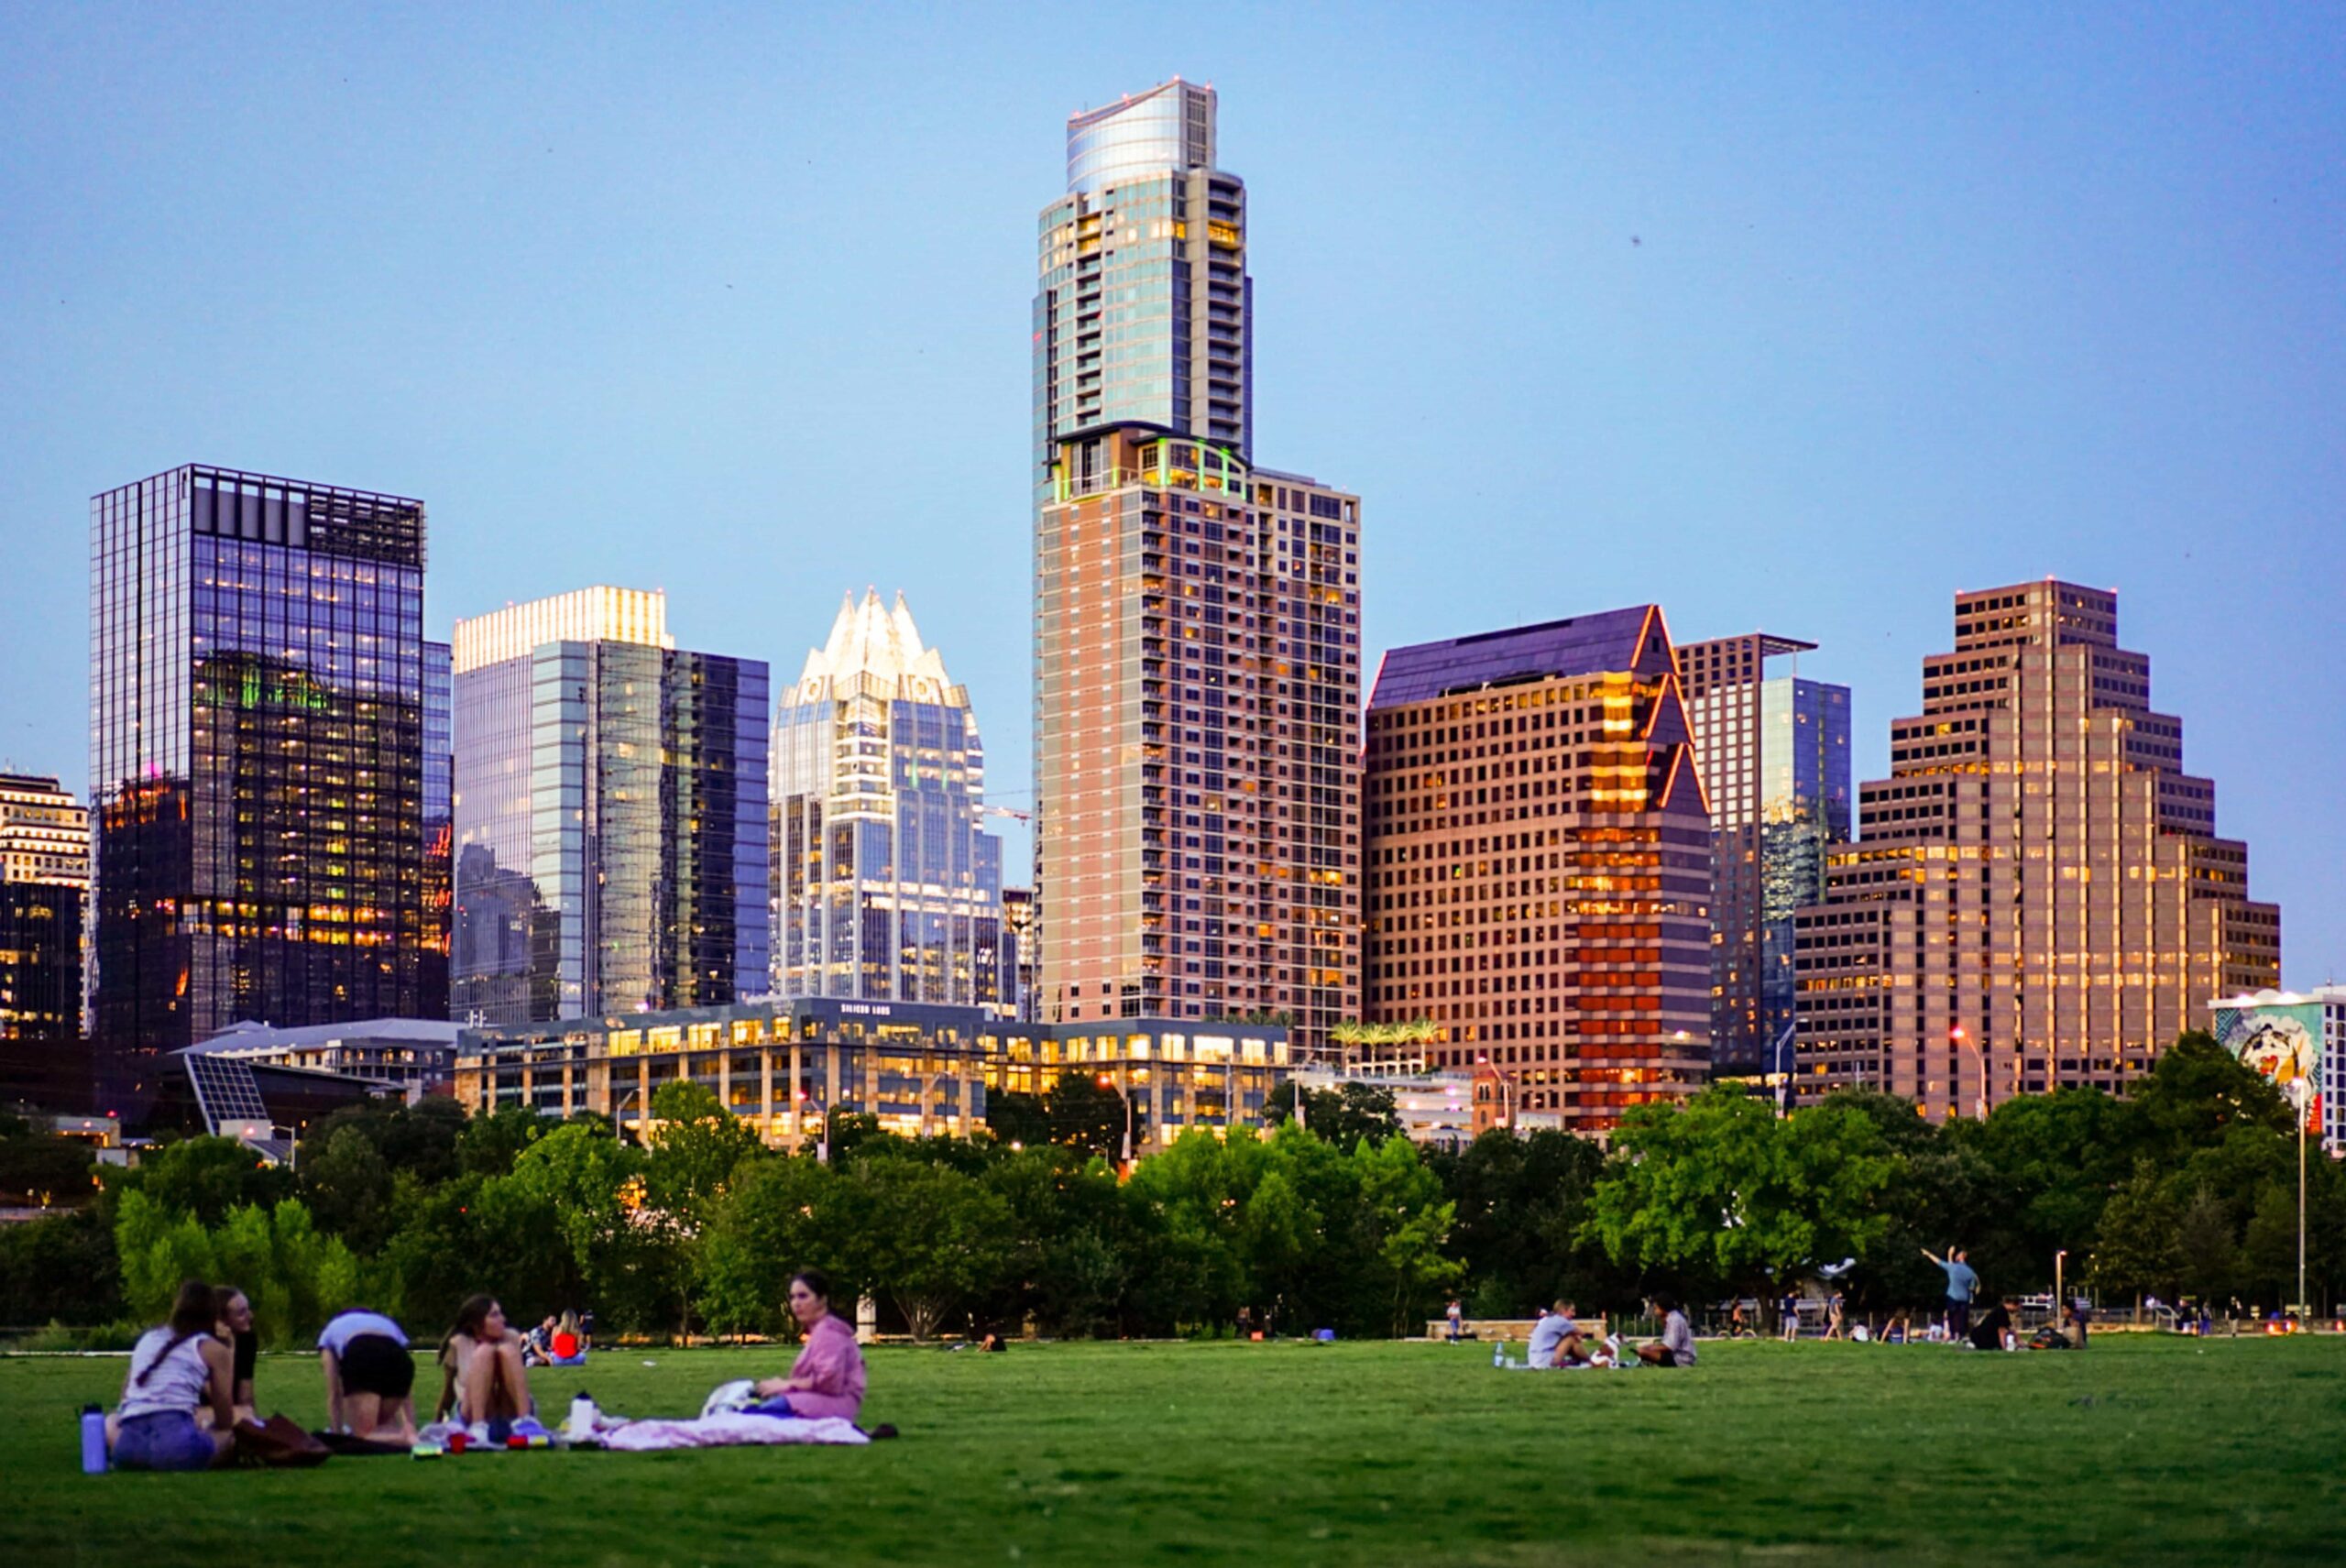 Austin, Texas skyline with a park in the foreground with individuals.